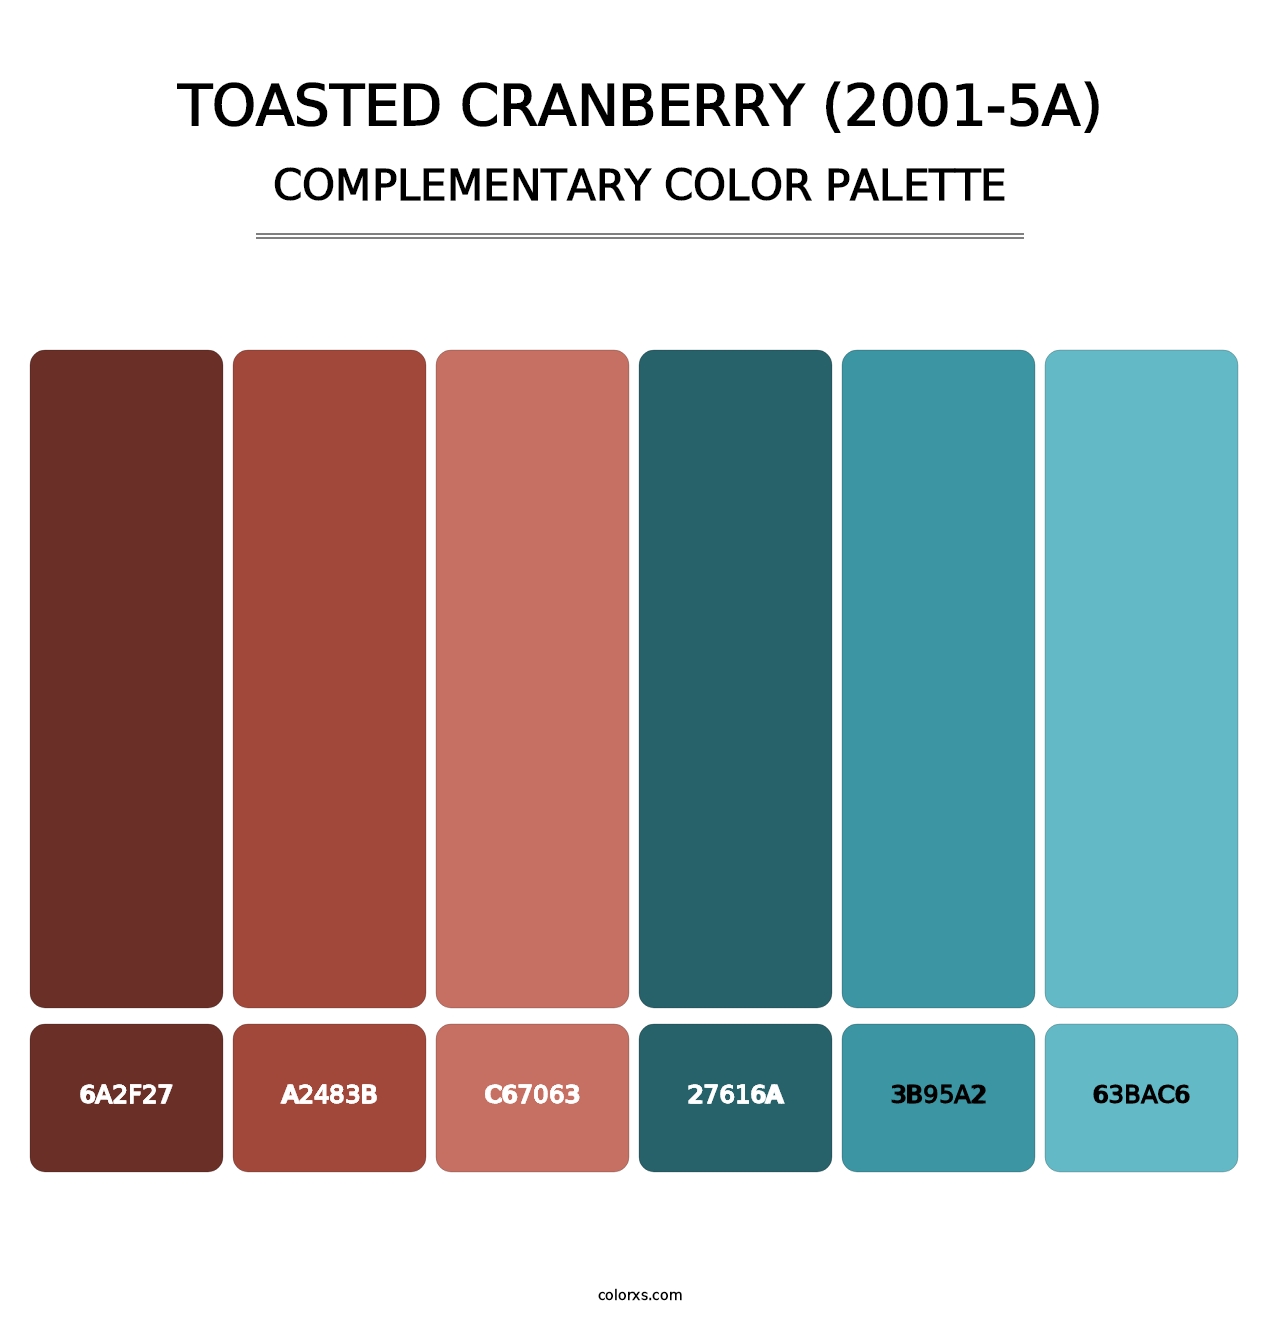 Toasted Cranberry (2001-5A) - Complementary Color Palette